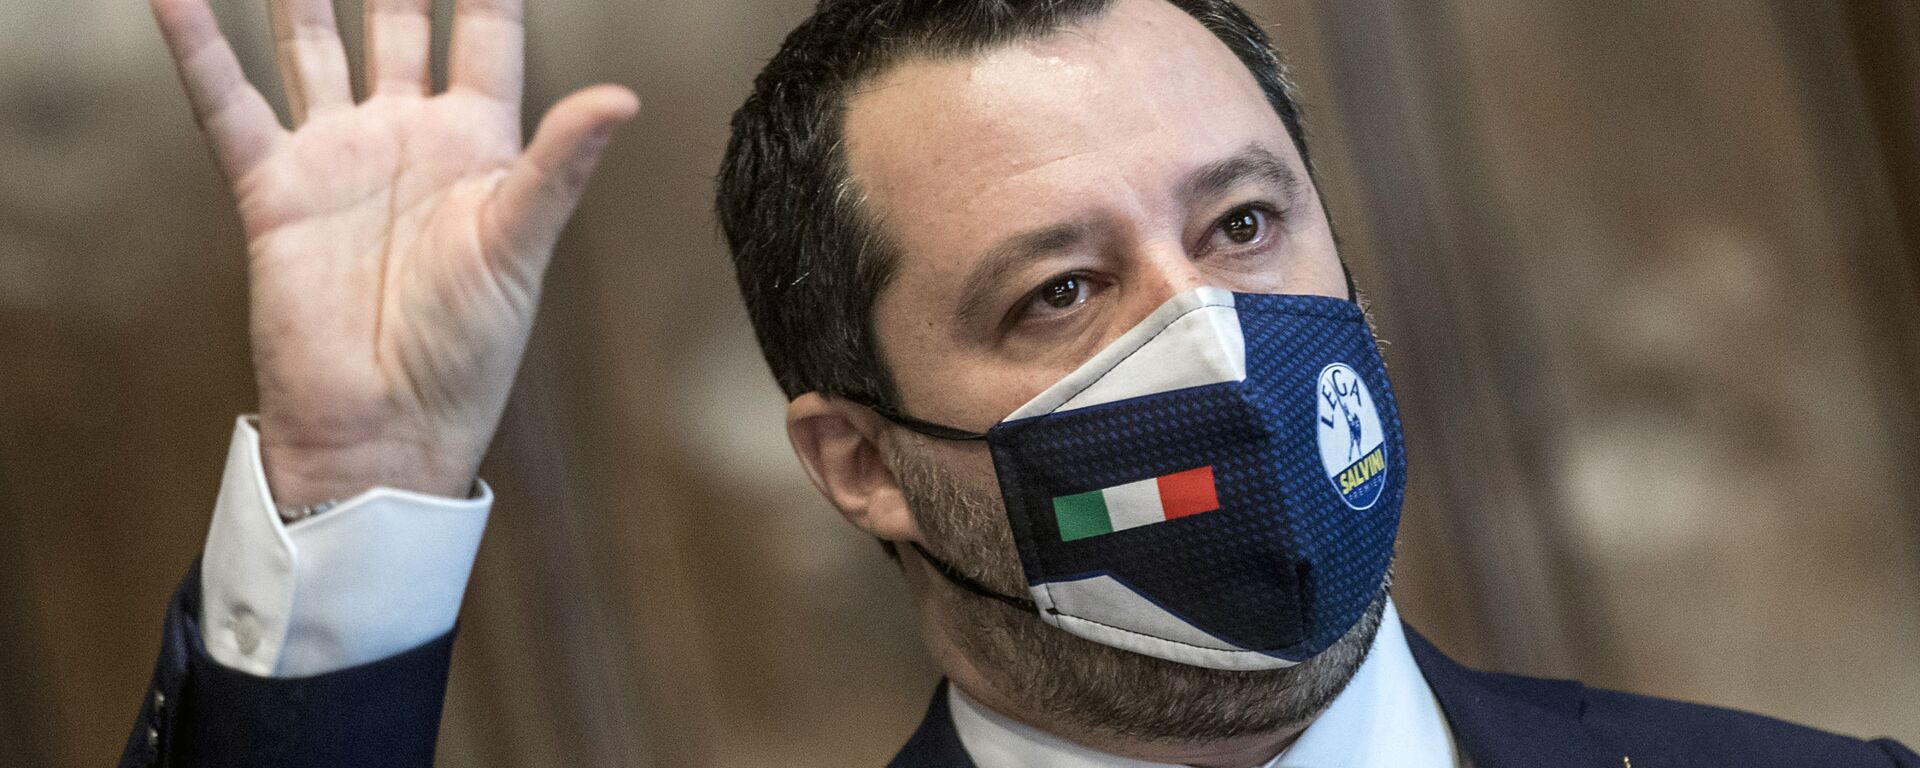 The League's Matteo Salvini addresses the media after meeting with Mario Draghi, at the Chamber of Deputies in Rome, Saturday, Feb. 6, 2021 - Sputnik International, 1920, 10.02.2021